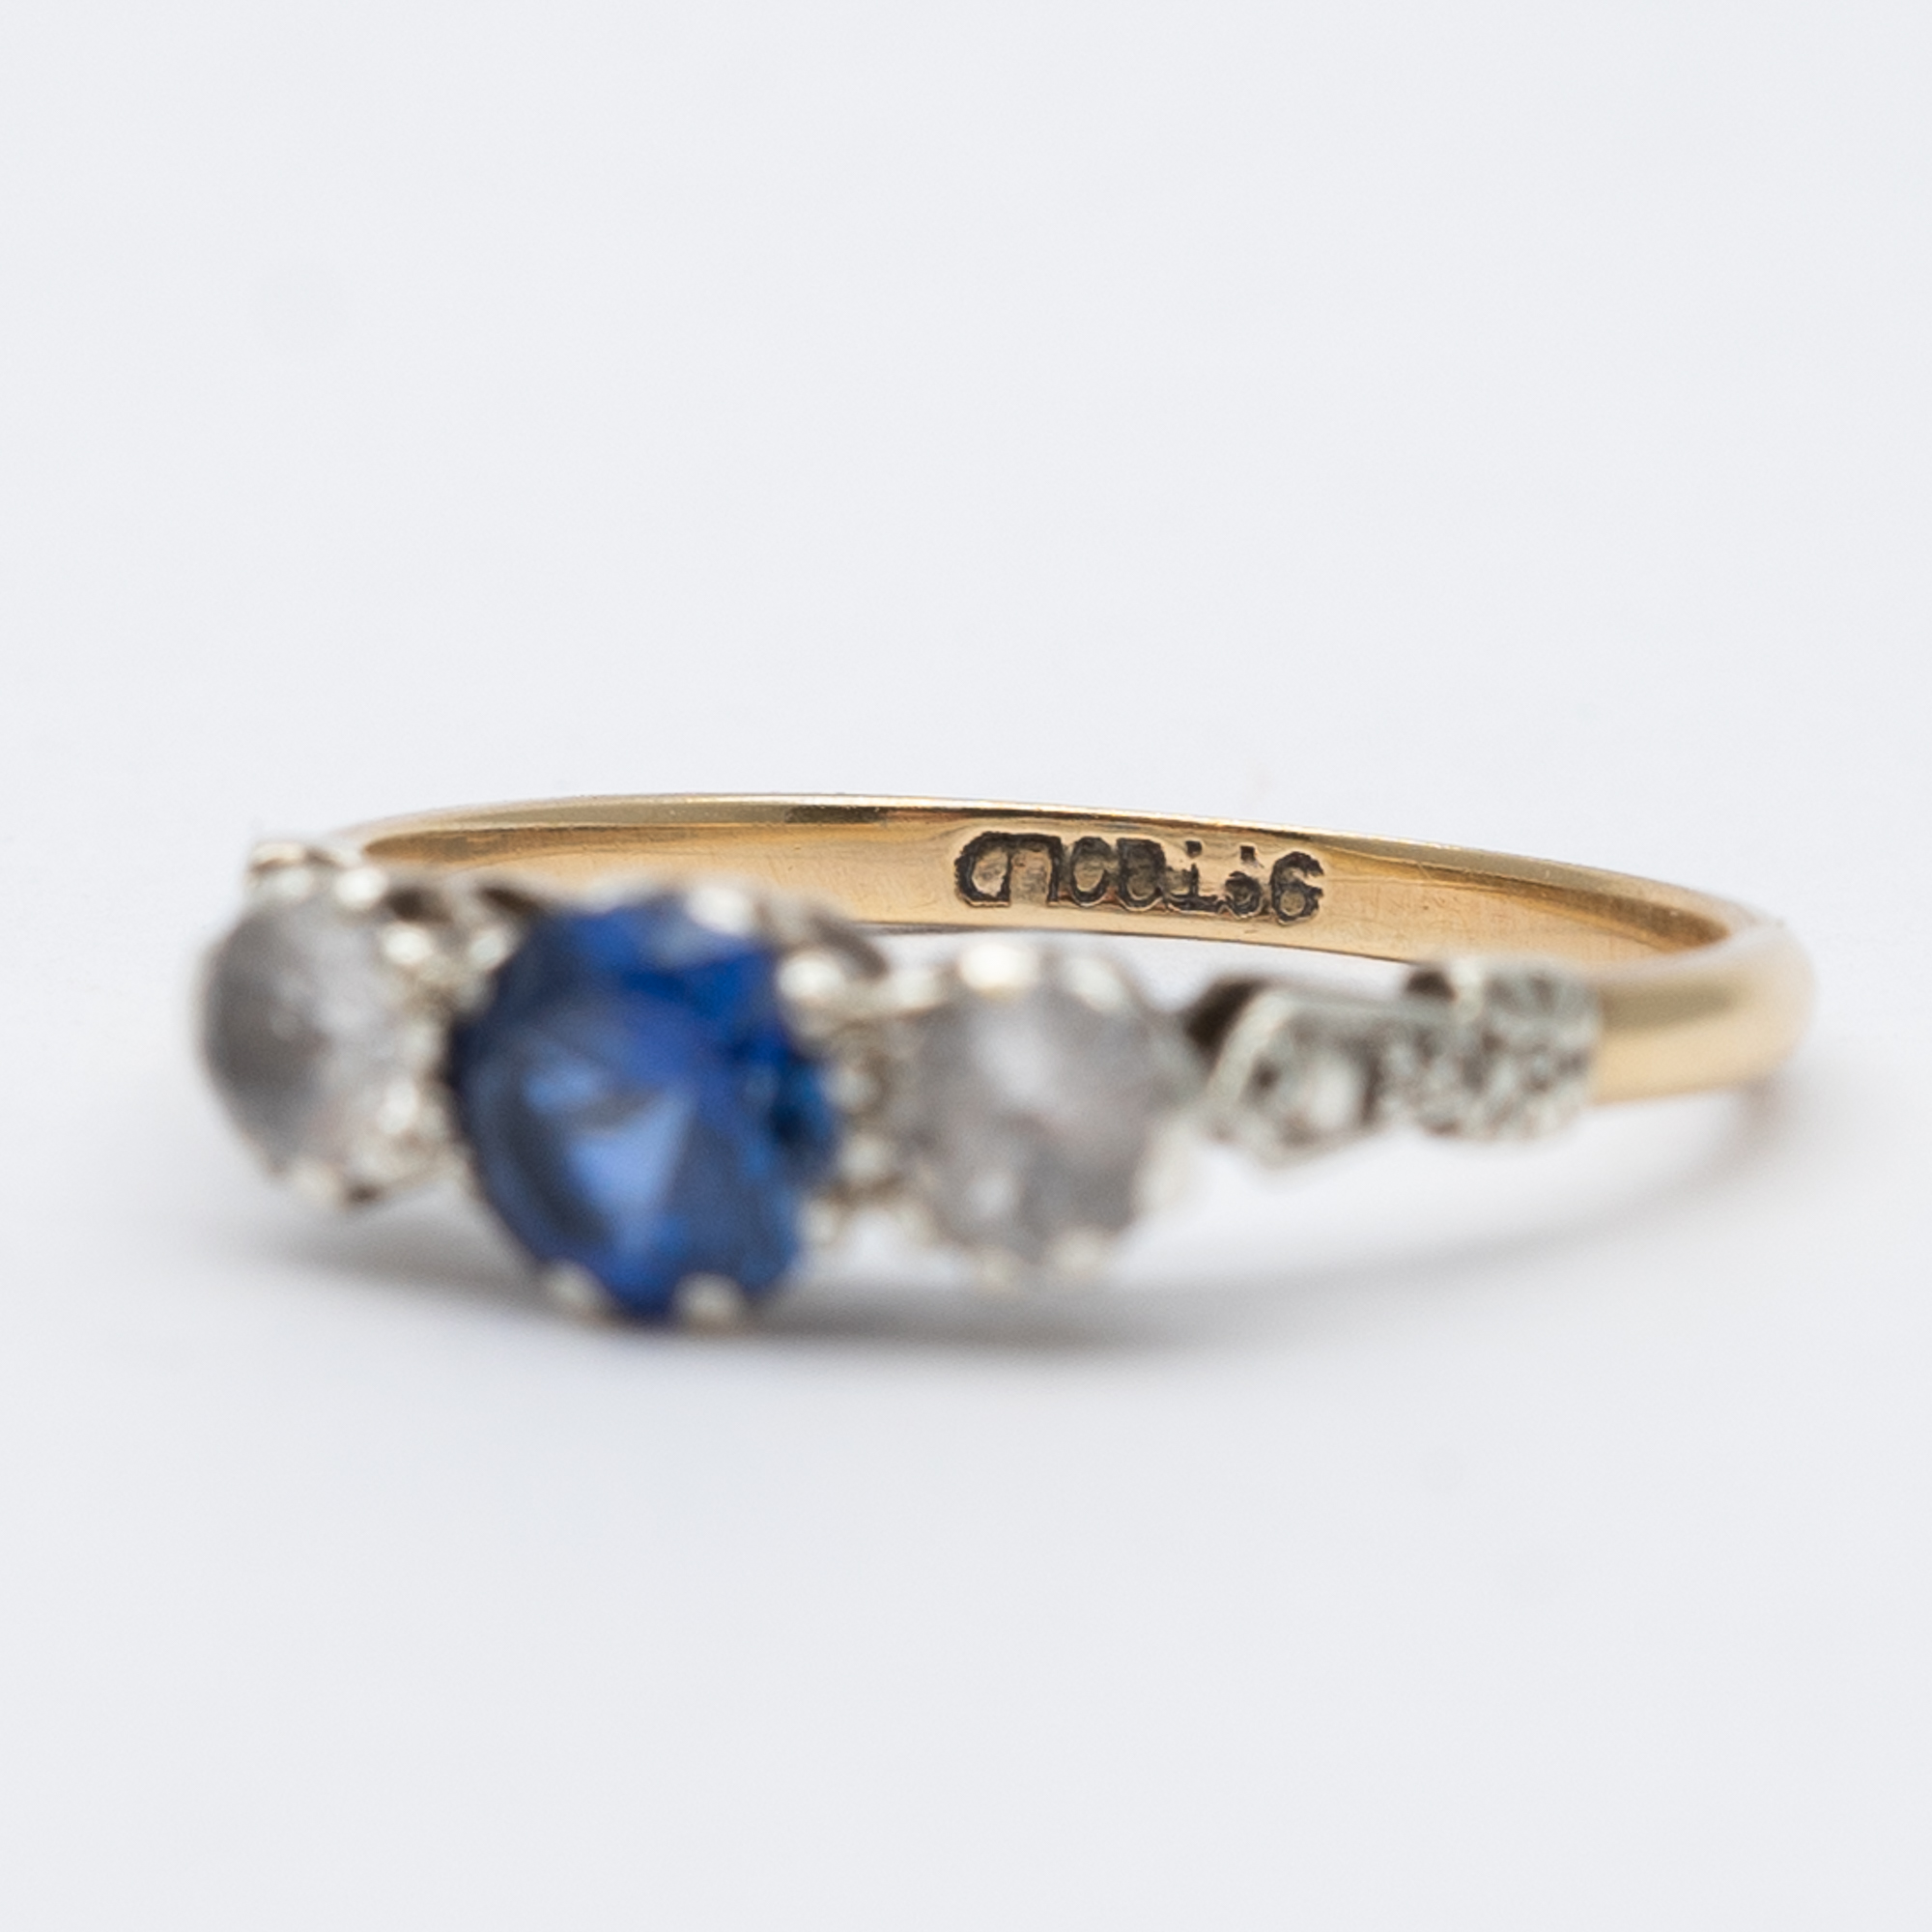 A 9ct yellow gold cz blue stone ring - Image 6 of 6